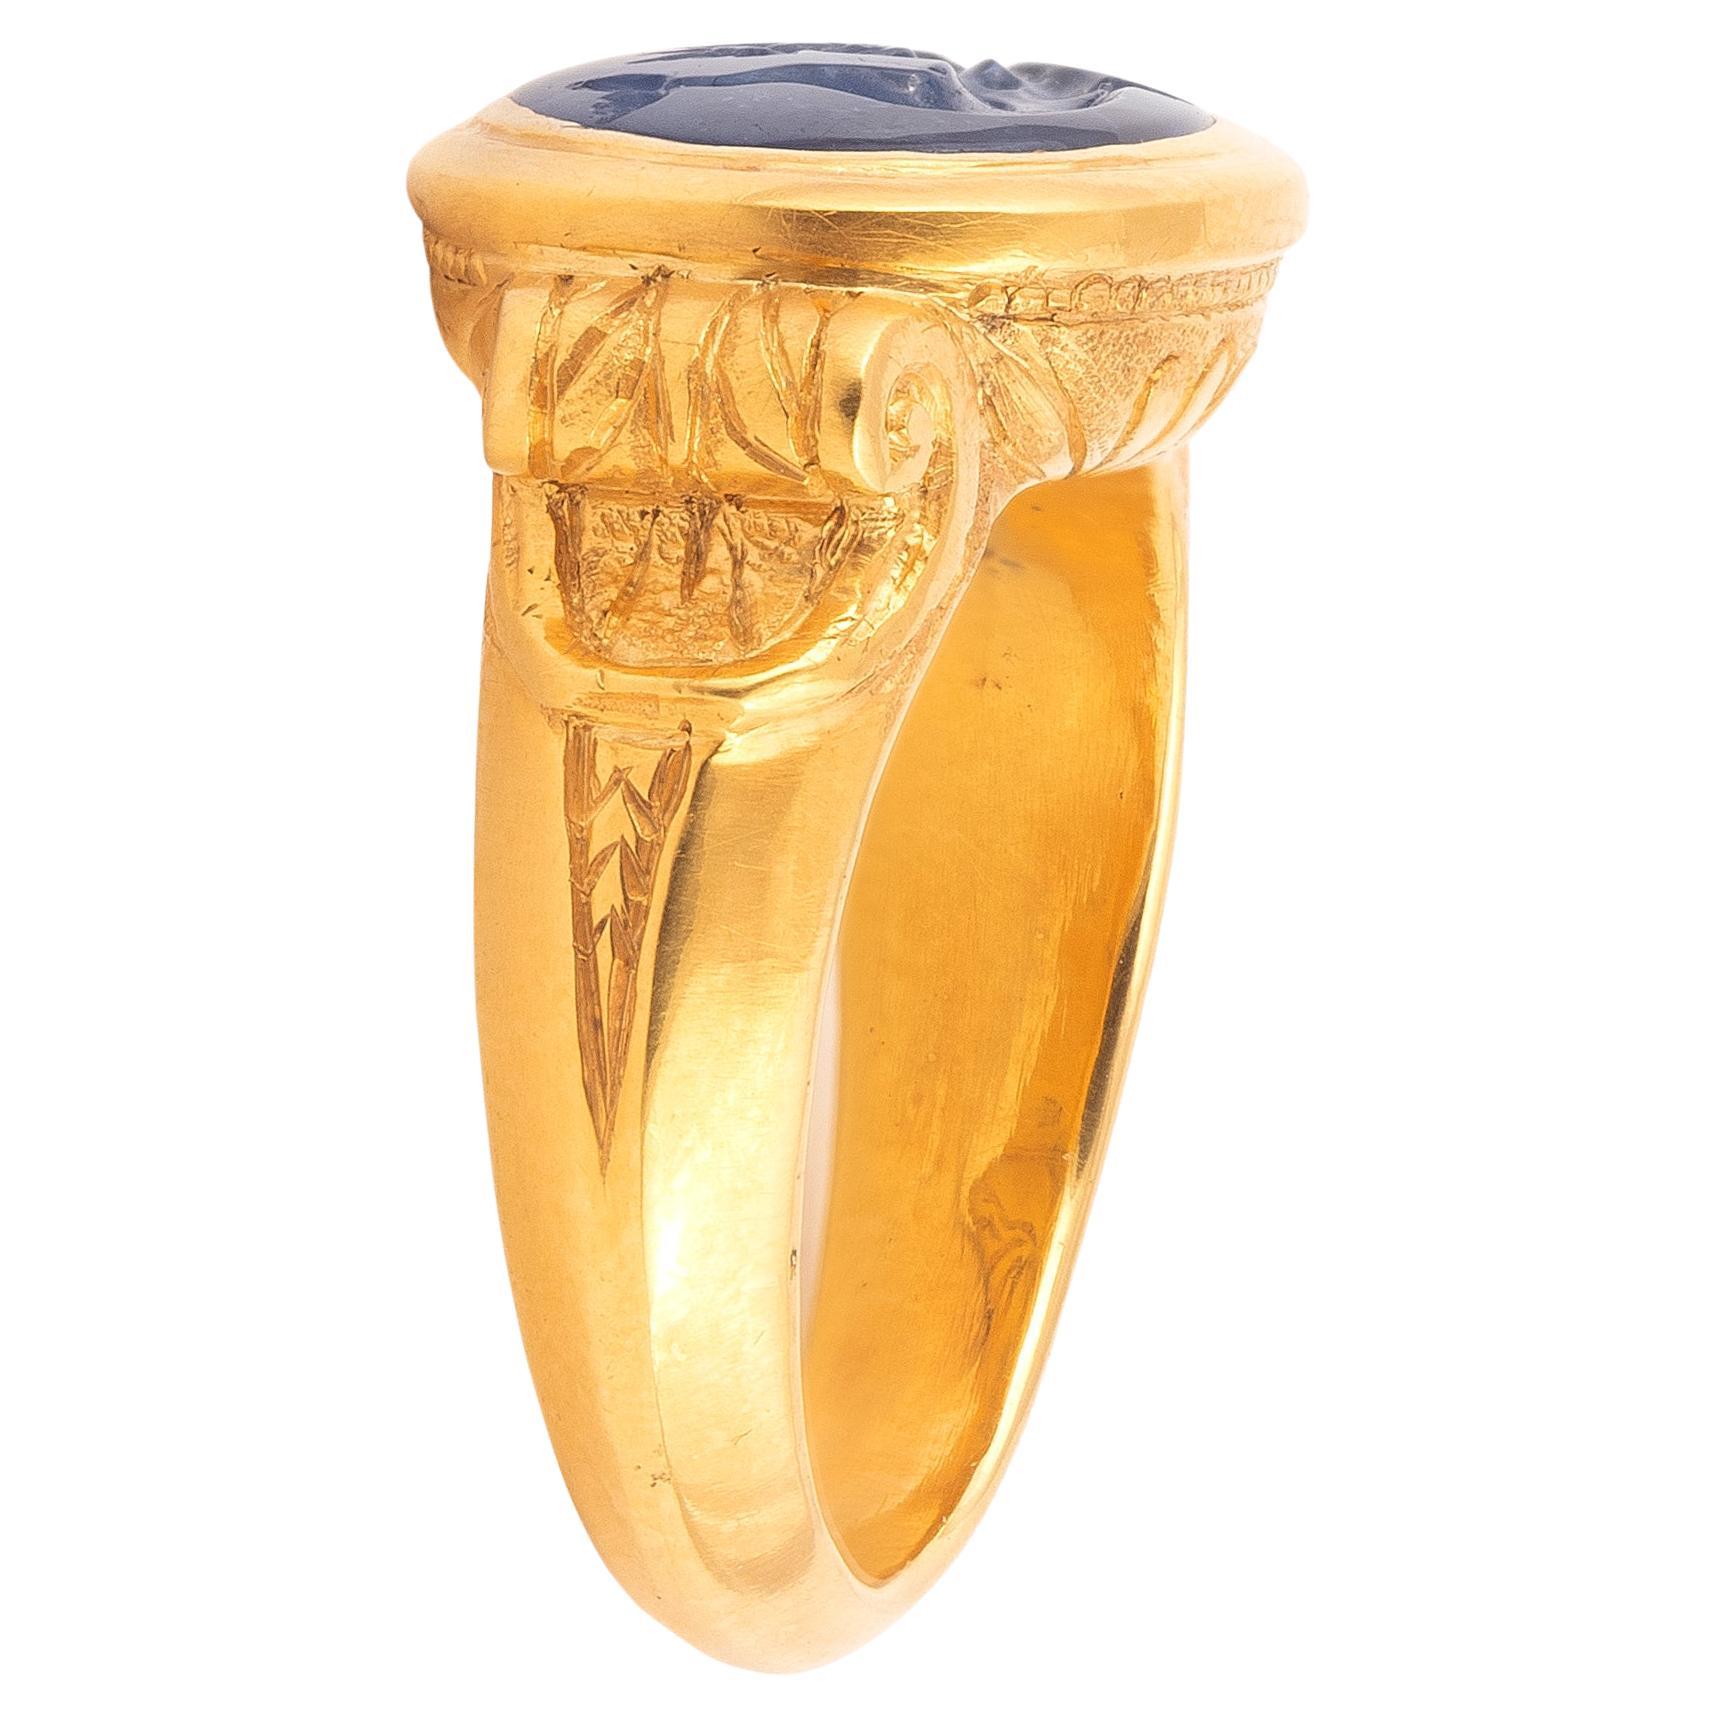 A Neoclassical carved sapphire intaglio, depicting Eros and Dolphin mounted in yellow gold. The top size is 21mm x 14mm; the finger size is 9 3/4 and the weight is 21 gr.